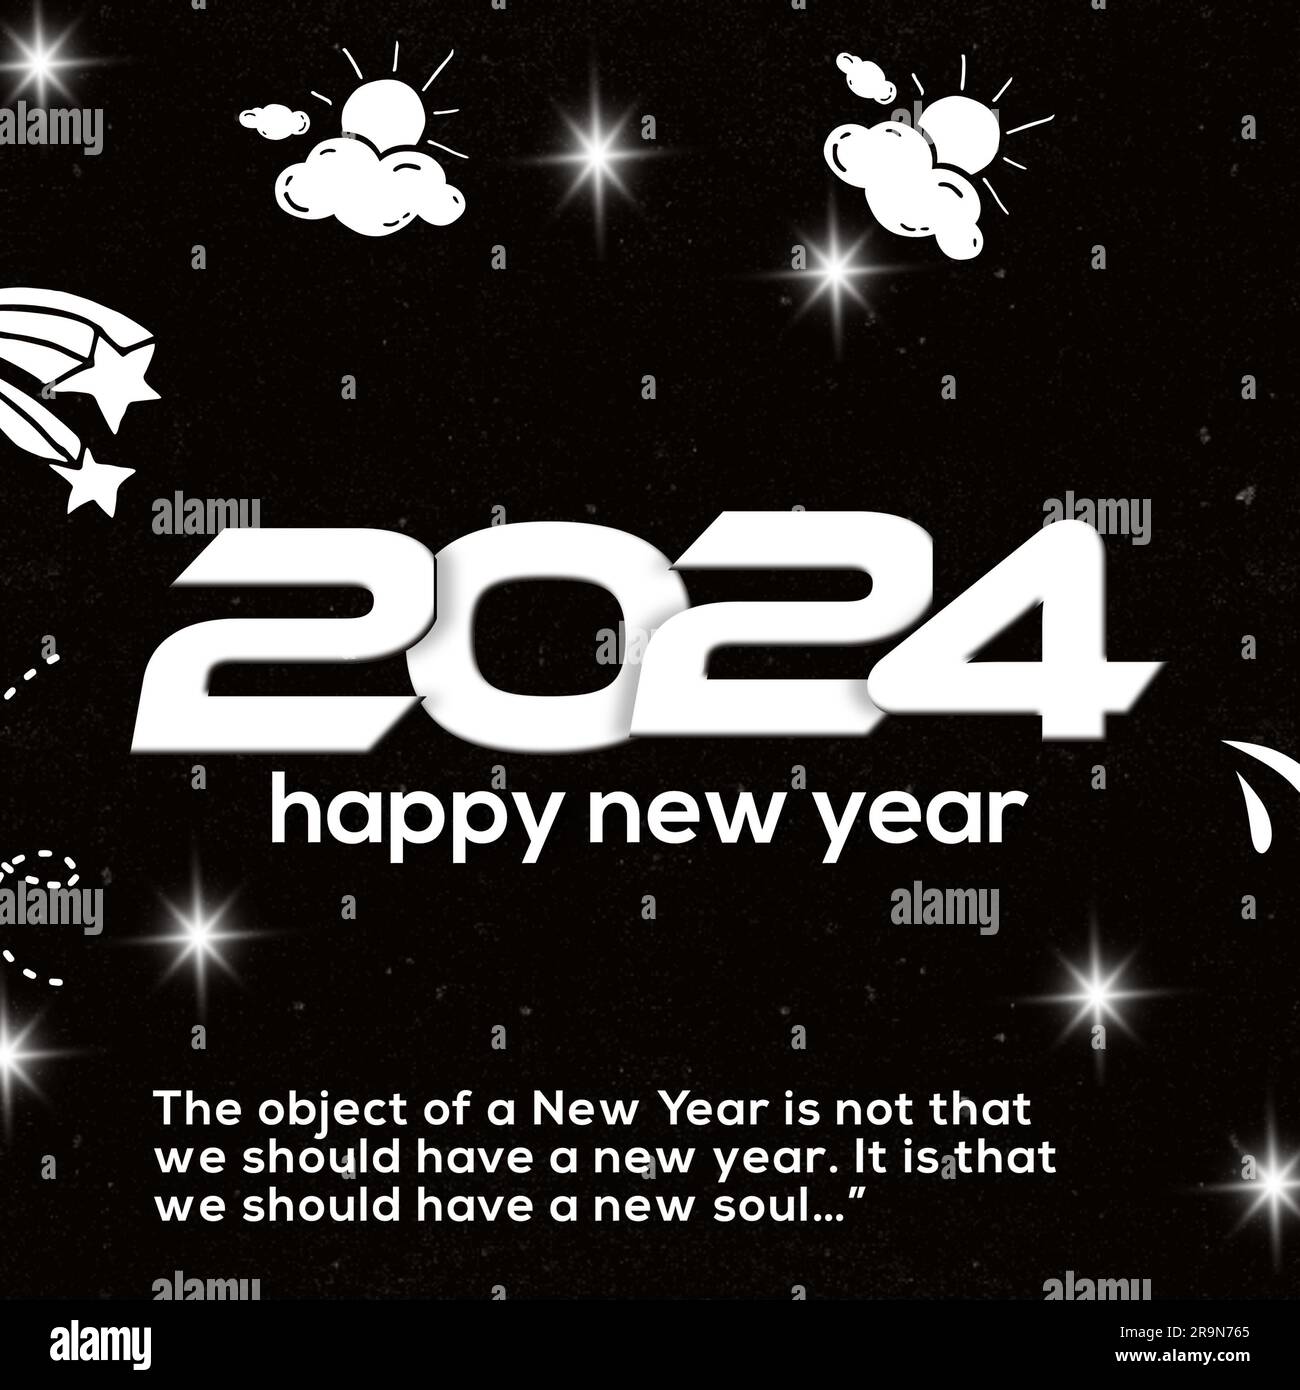 2024 wallpaper download, happy new year wallpaper, hd quality, 2024 celebration Stock Photo